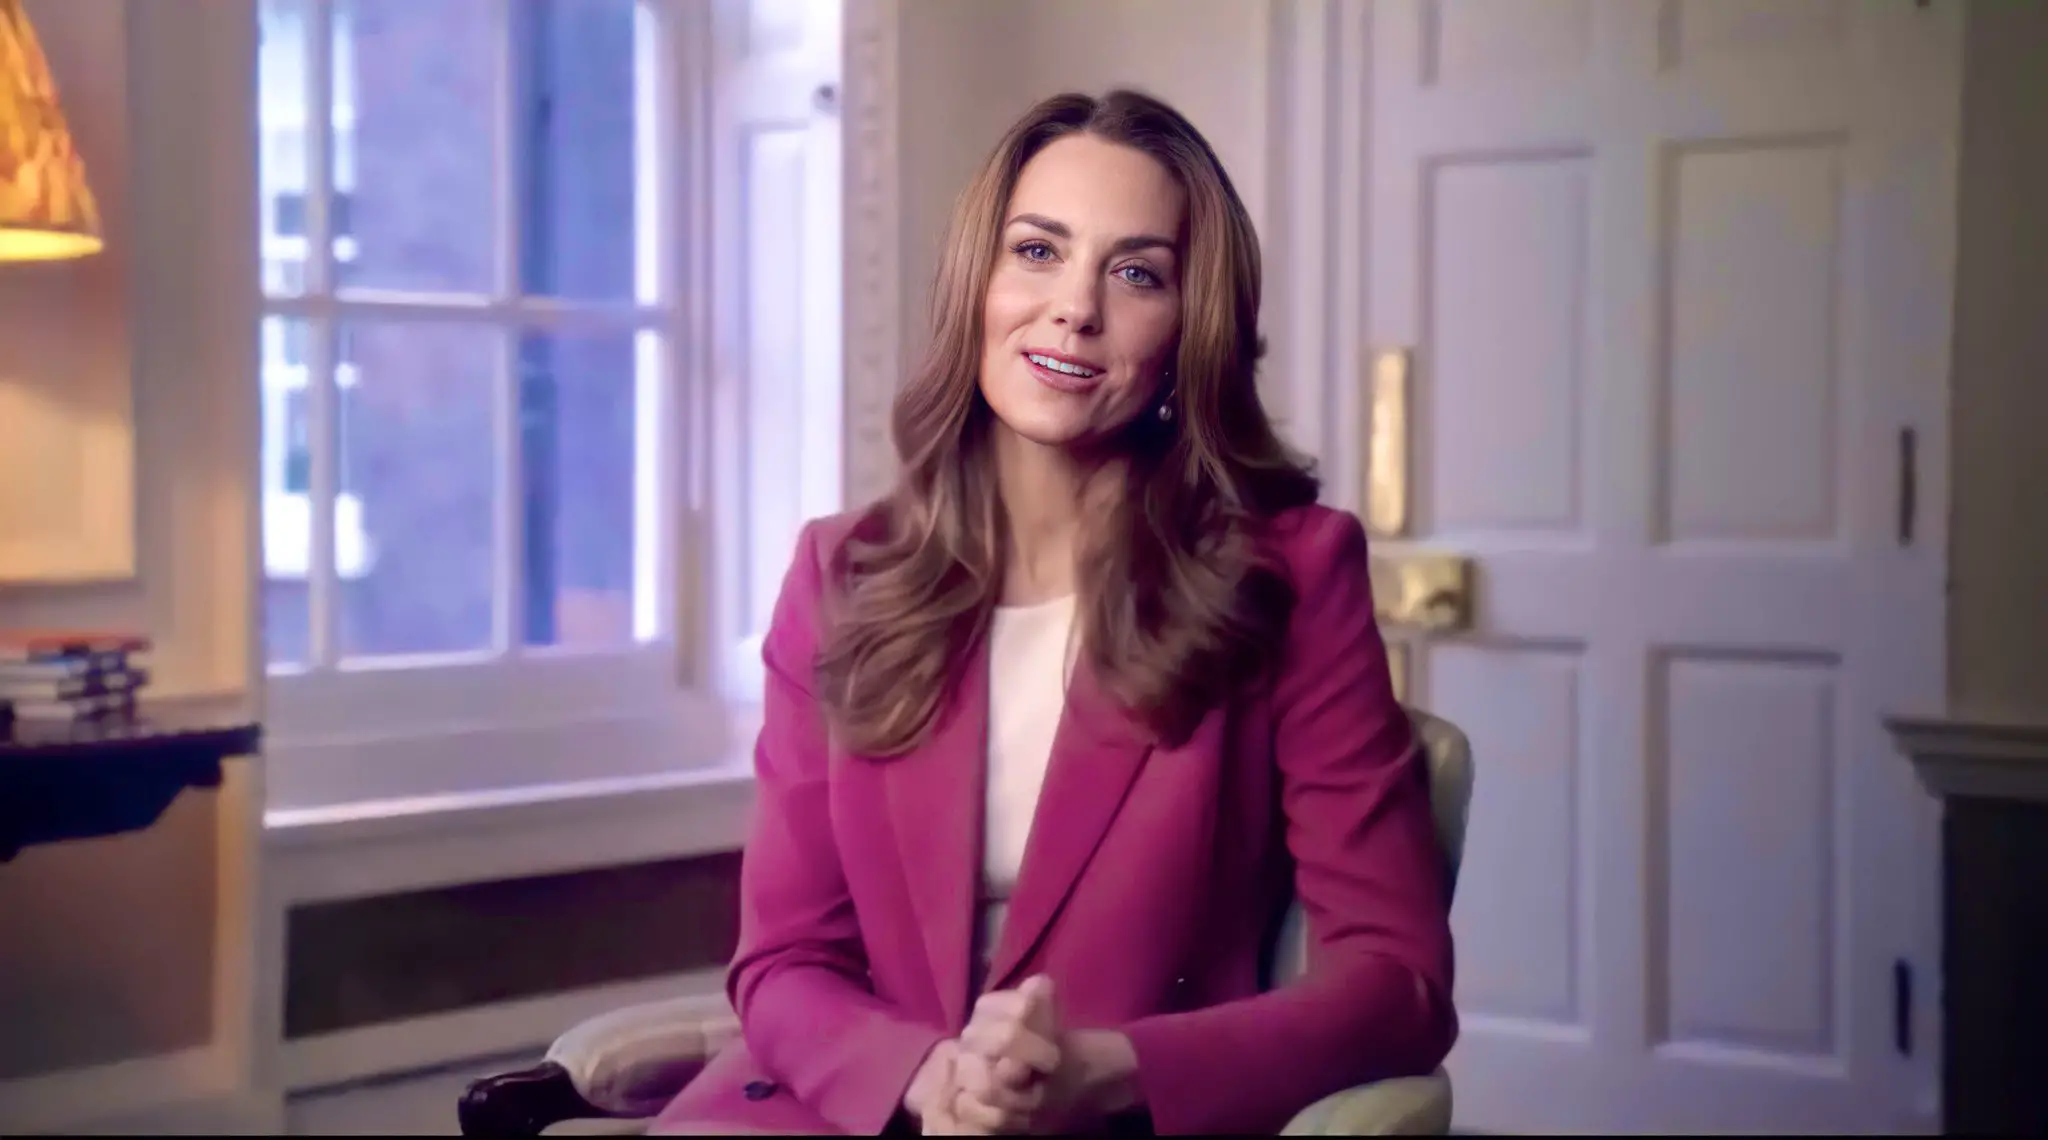 The Duchess of Cambridge talked about the importance of Early Years in her Keynote speech